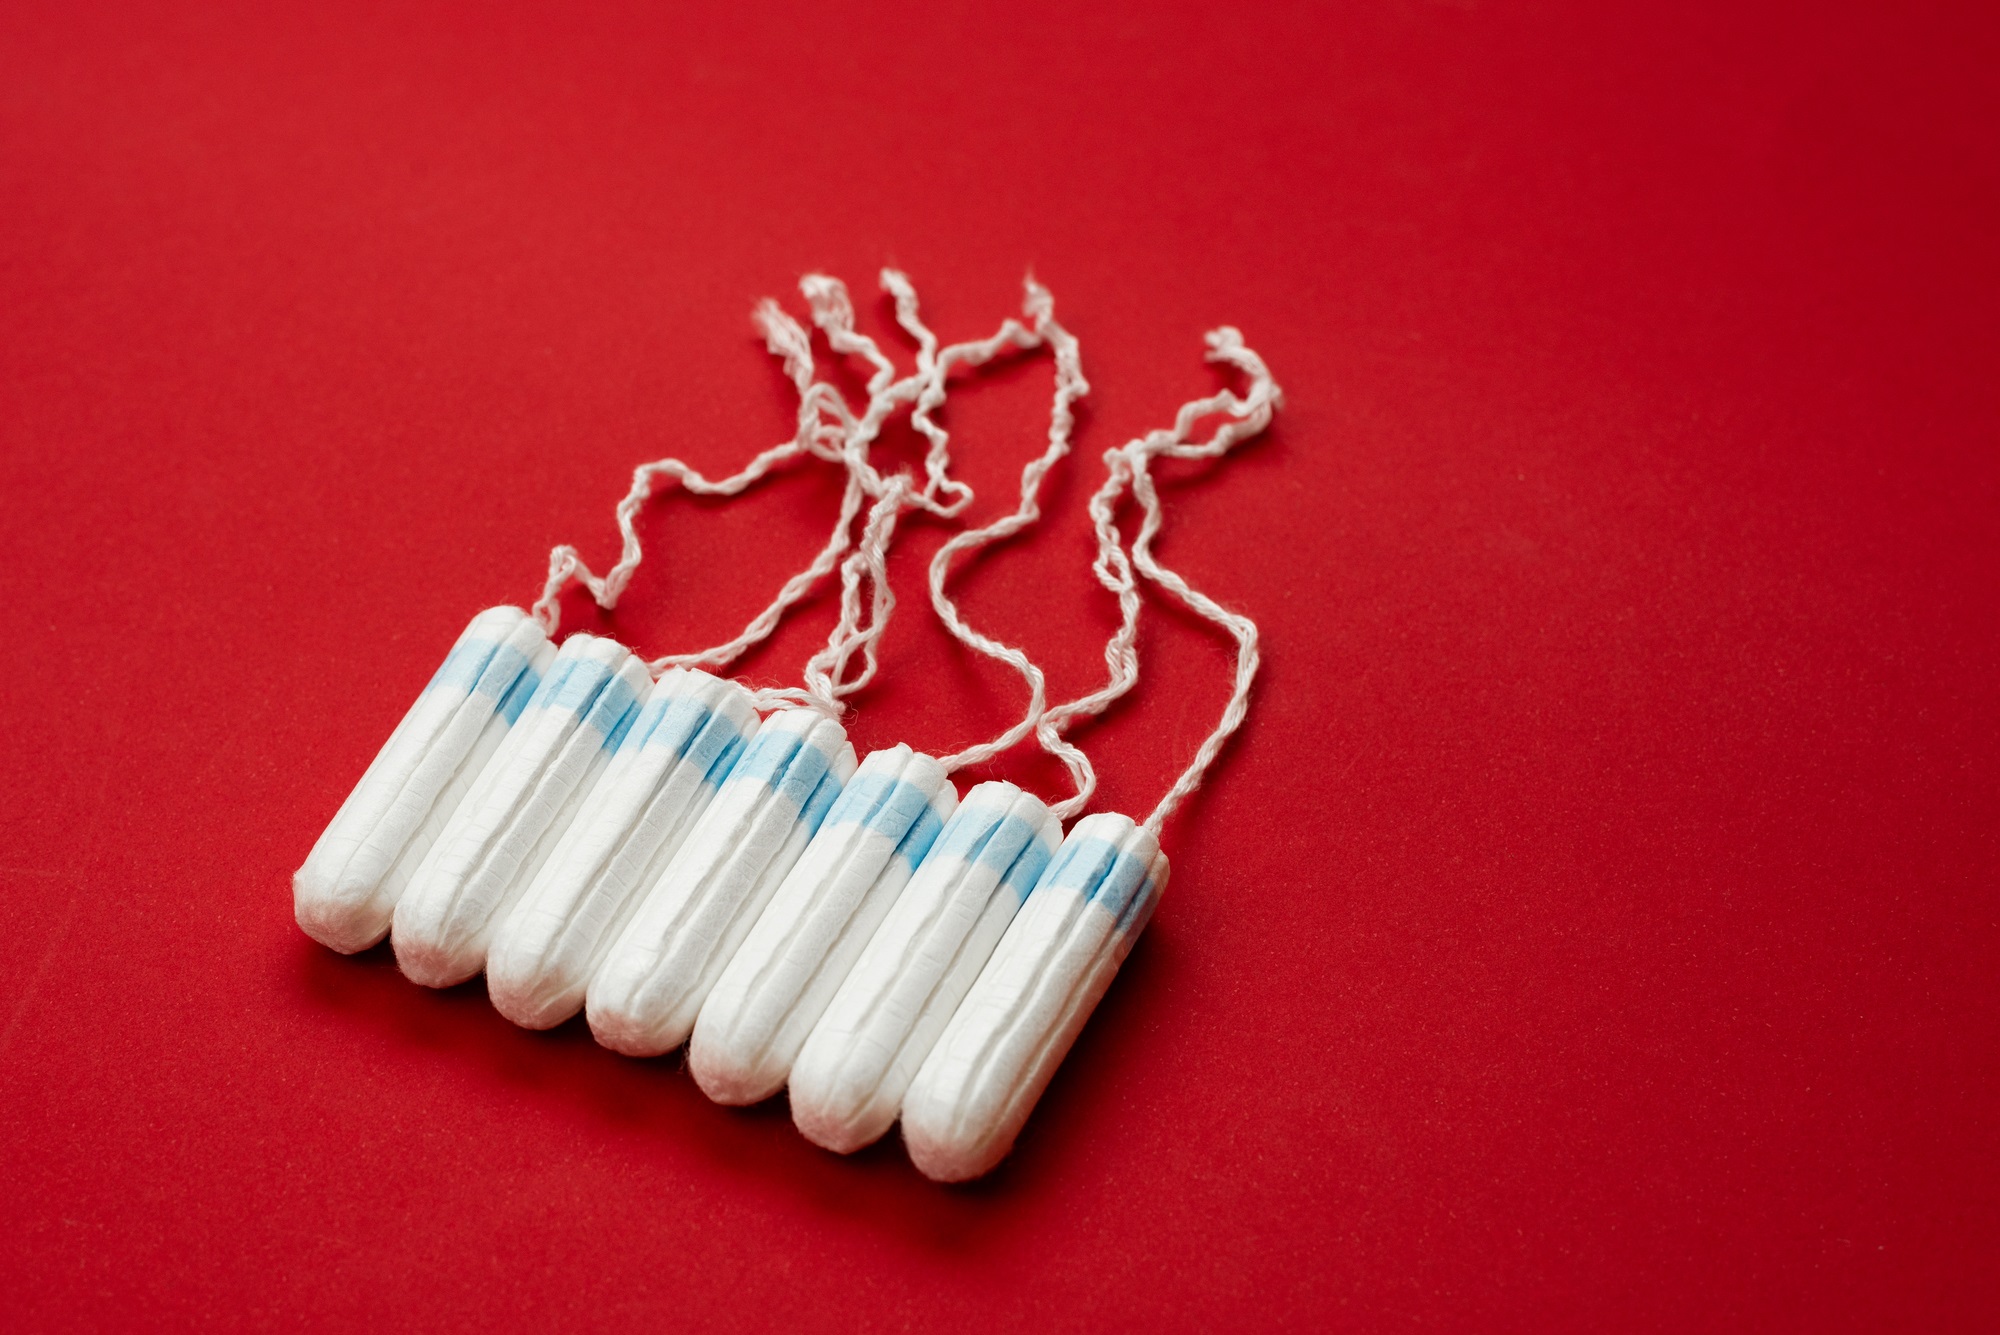 How worried should you be about the ingredients in tampons?